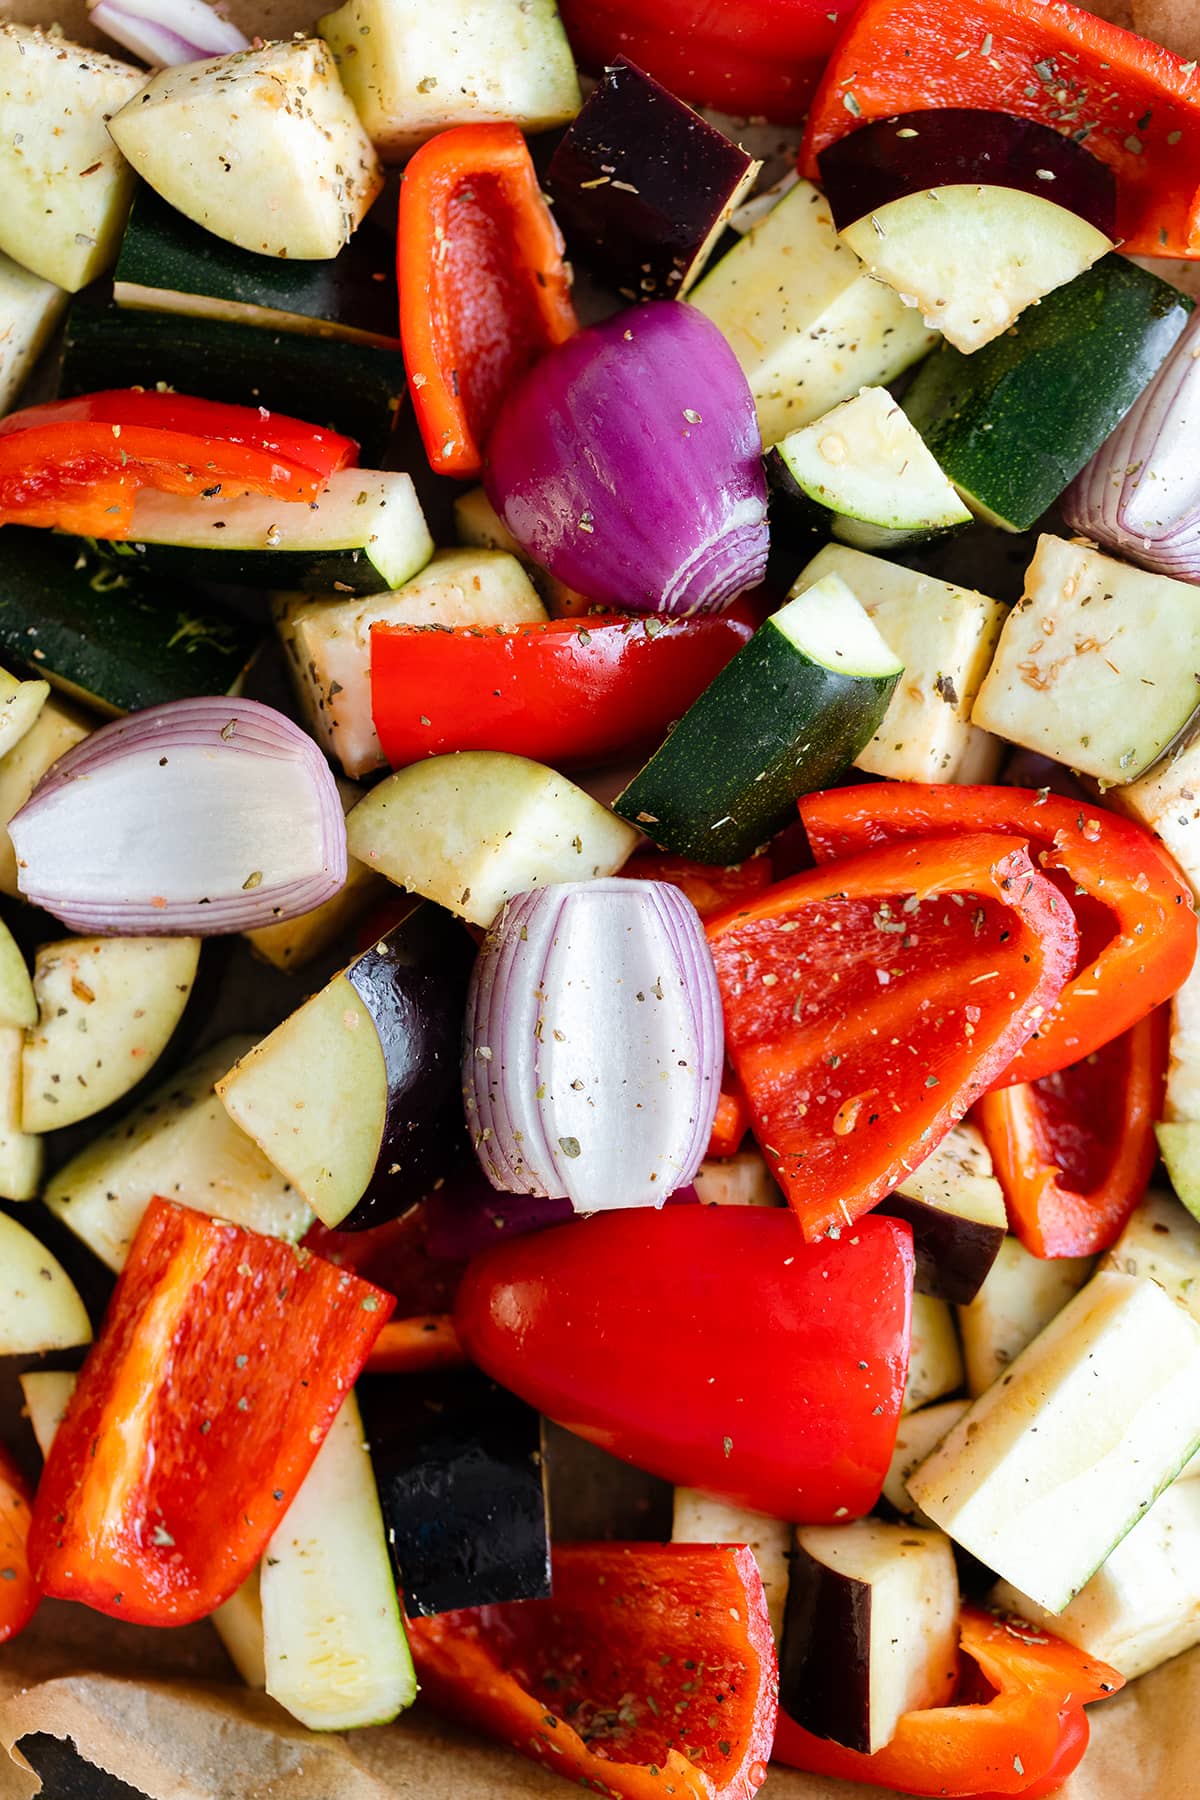 Chopped mixed vegetables with dried herbs - red onion, eggplant, zucchini, and red bell pepper